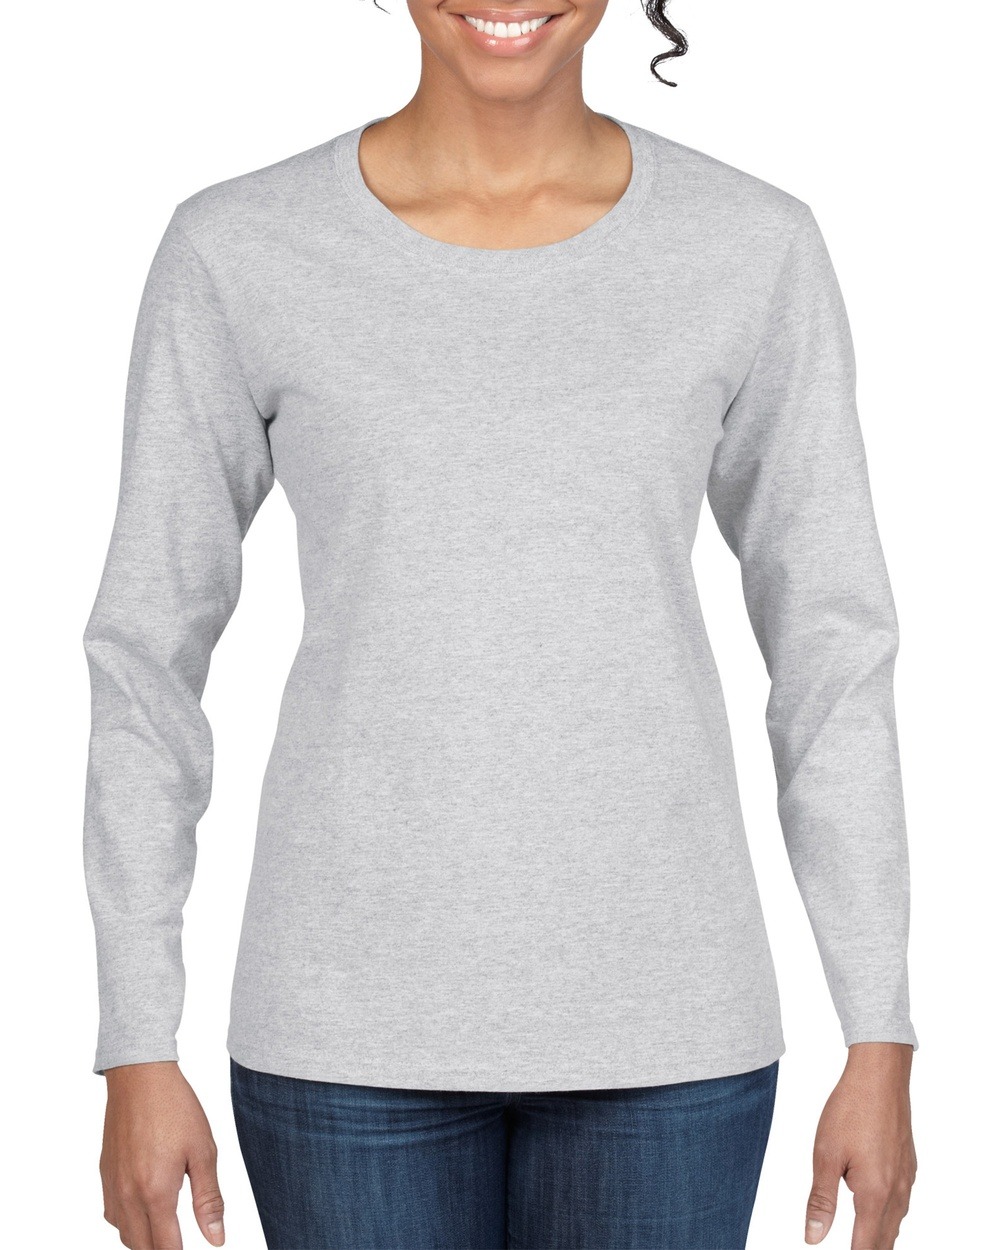 GD051 - Heavy Cotton™ Ladies' Long Sleeve T-Shirt - One Stop